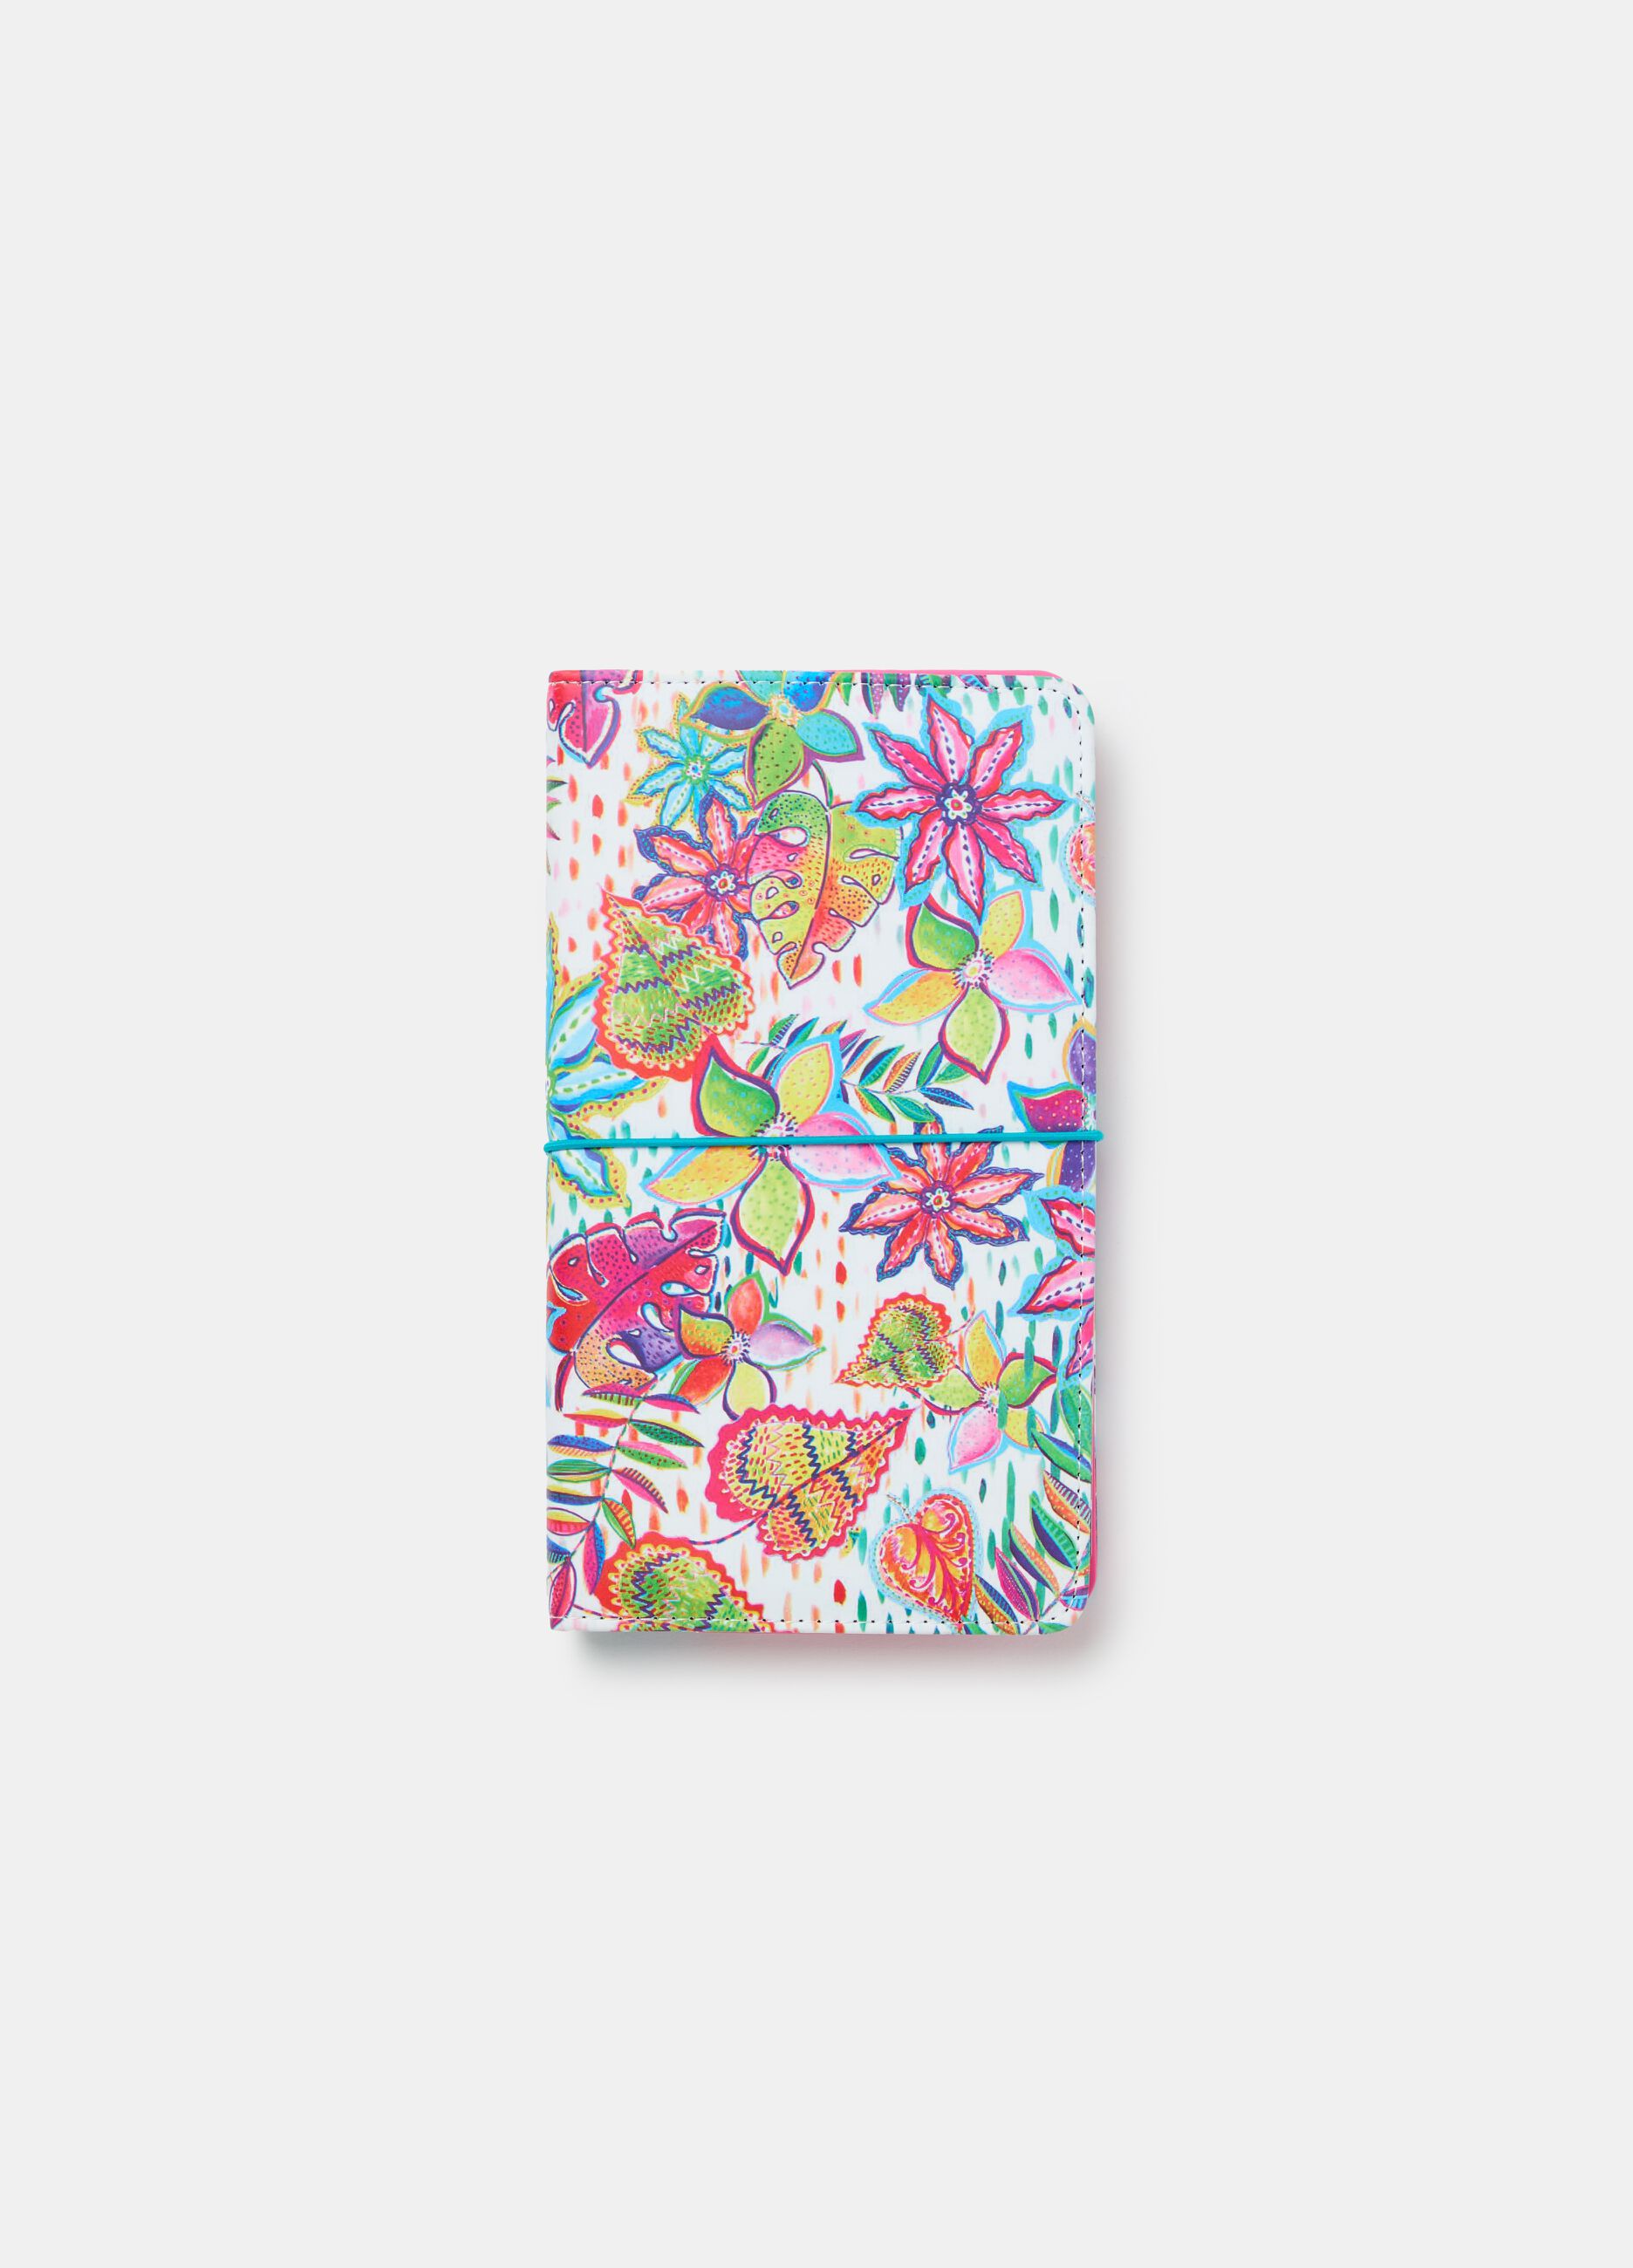 Notepad cover